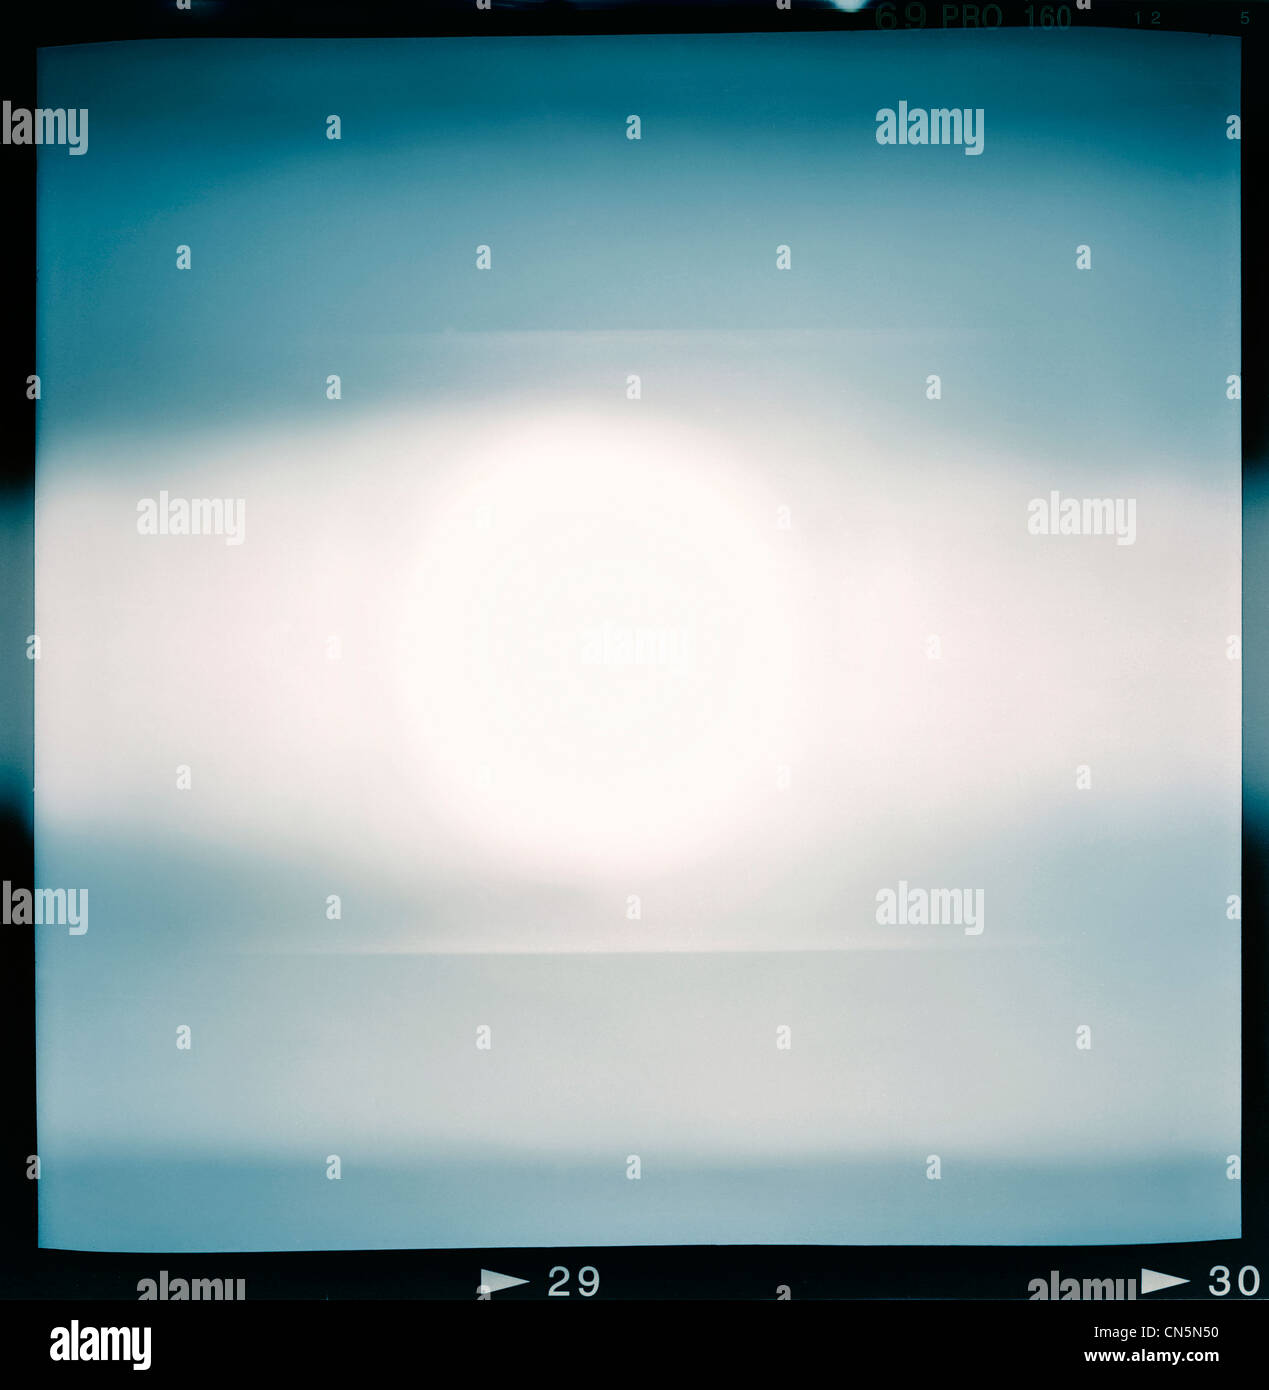 Blank medium format (6x6) color film frame with abstract filling containing lightleak in center, kind of a background Stock Photo